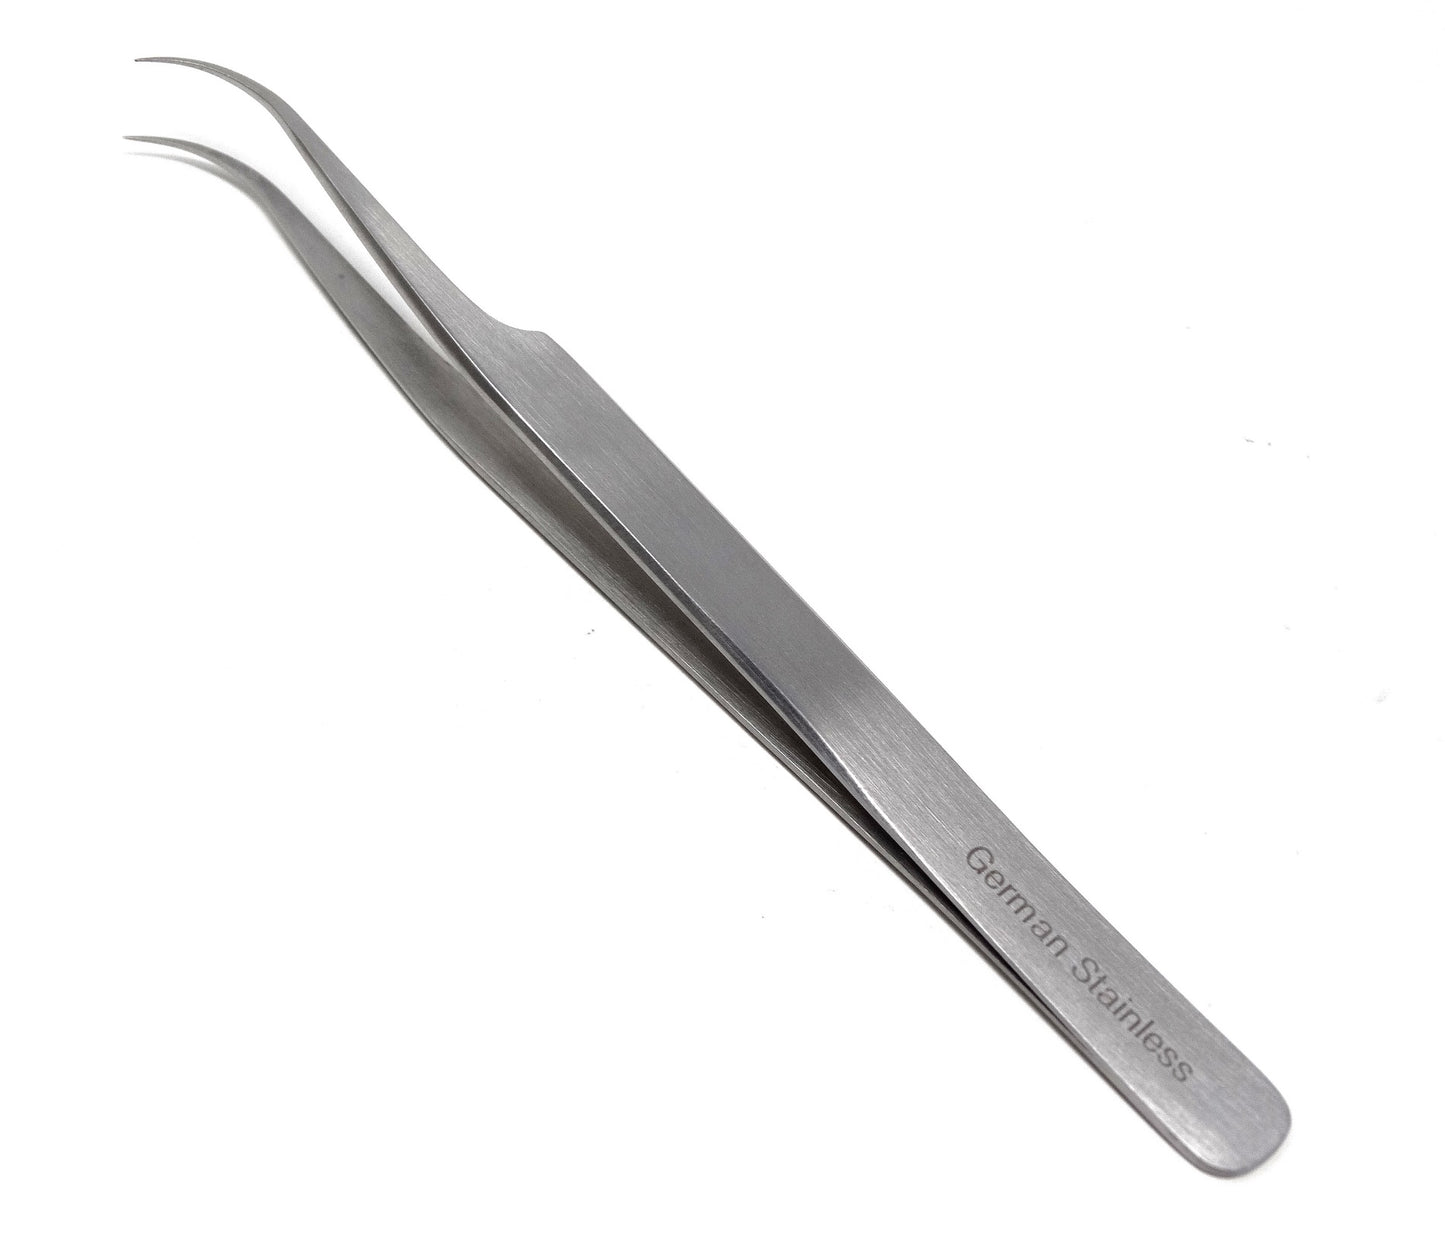 Stainless Steel Micro Surgical Forceps Tweezers Strong Curved, Premium Quality